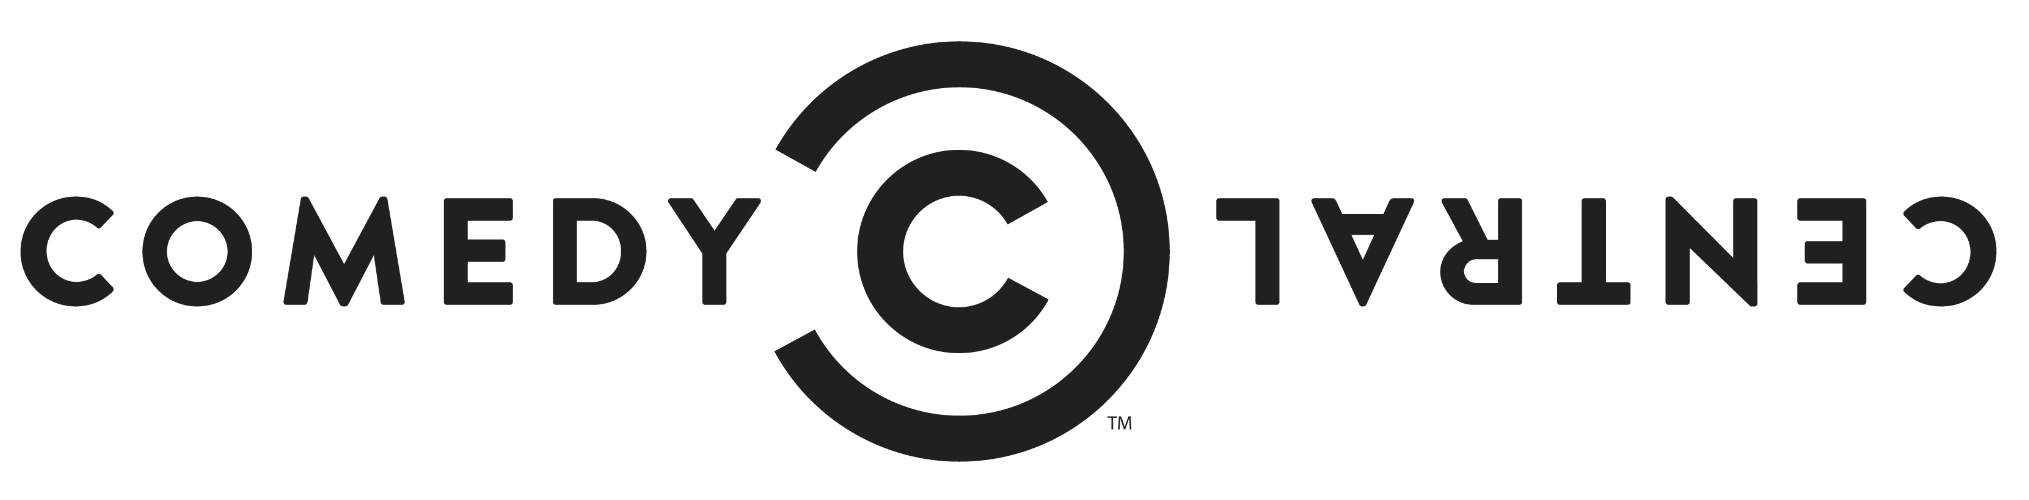 Comedy Central Logo - File:Comedy Central Logo 2011 horizontal.png - Wikimedia Commons